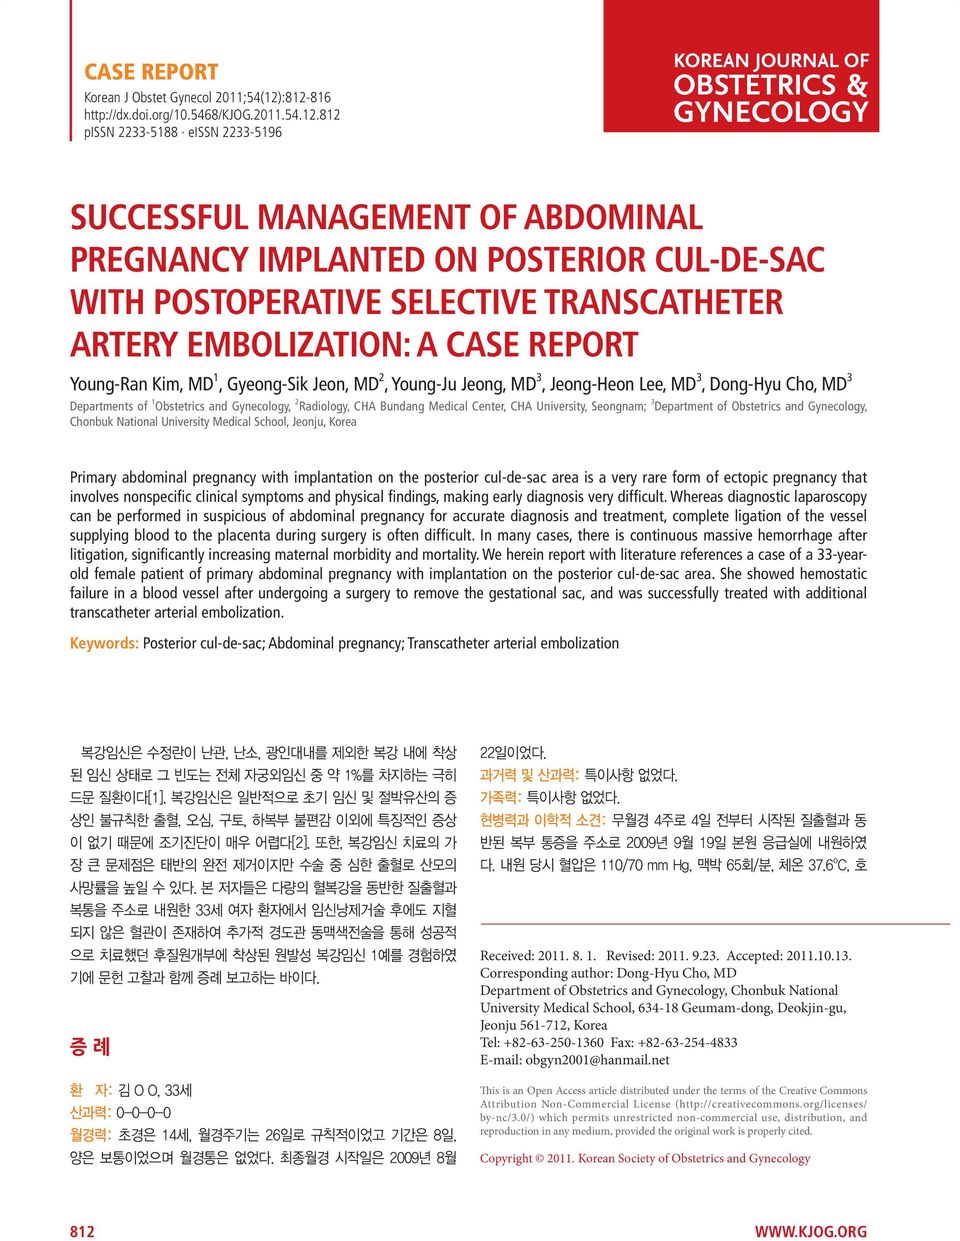 TRANSCATHETER ARTERY EMBOLIZATION: A CASE REPORT Young-Ran Kim, MD 1, Gyeong-Sik Jeon, MD 2, Young-Ju Jeong, MD 3, Jeong-Heon Lee, MD 3, Dong-Hyu Cho, MD 3 Departments of 1 Obstetrics and Gynecology,